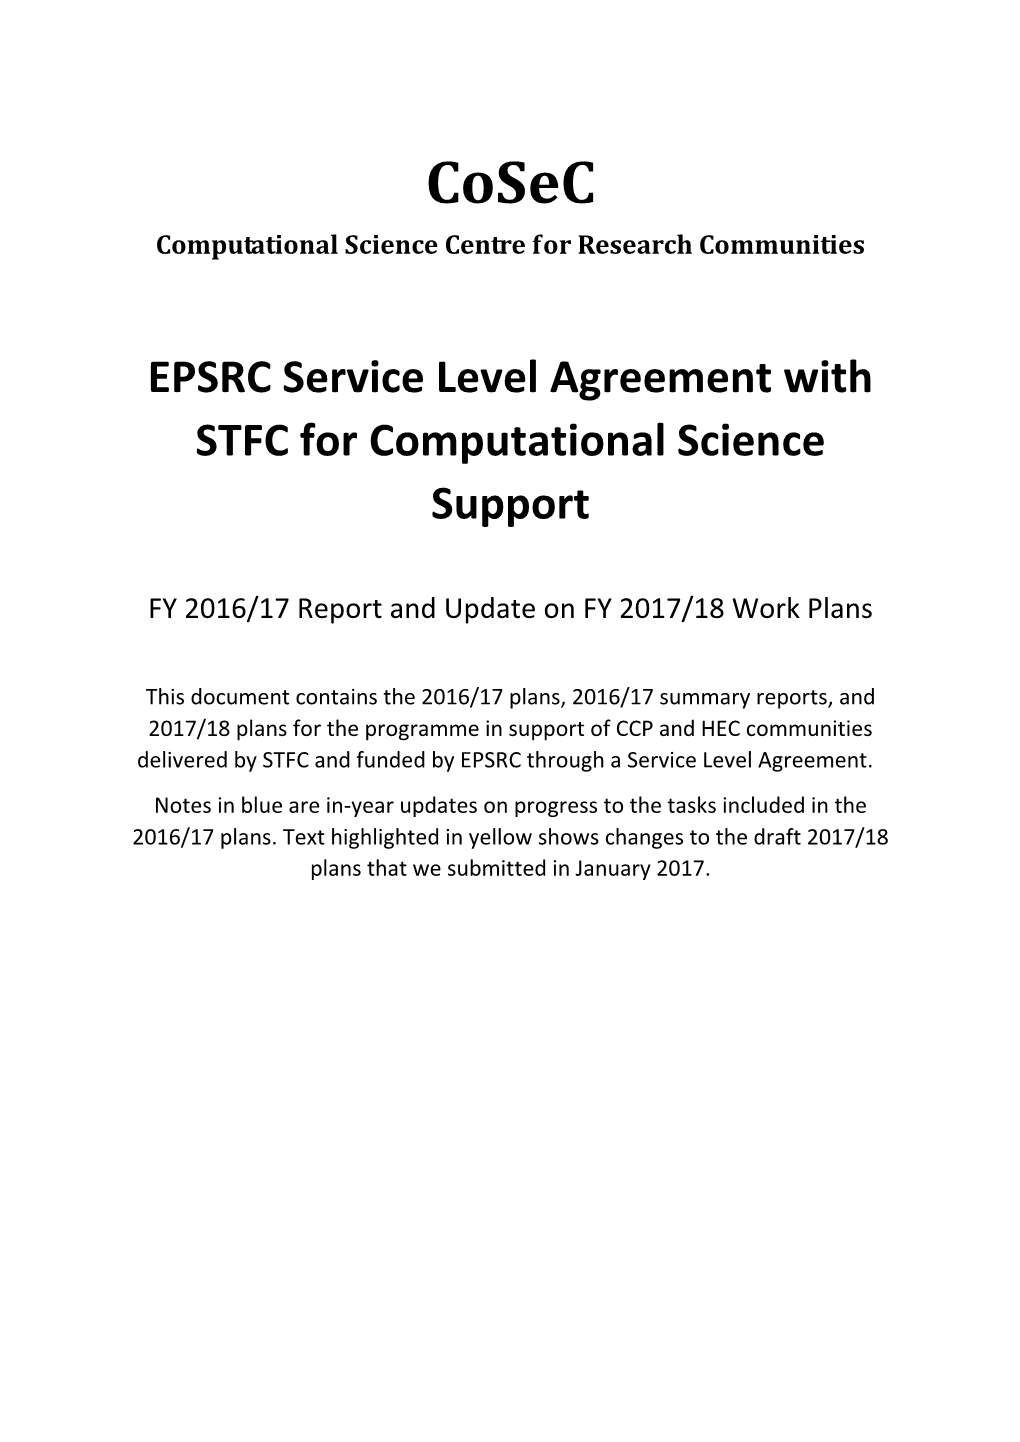 EPSRC Service Level Agreement with STFC for Computational Science Support